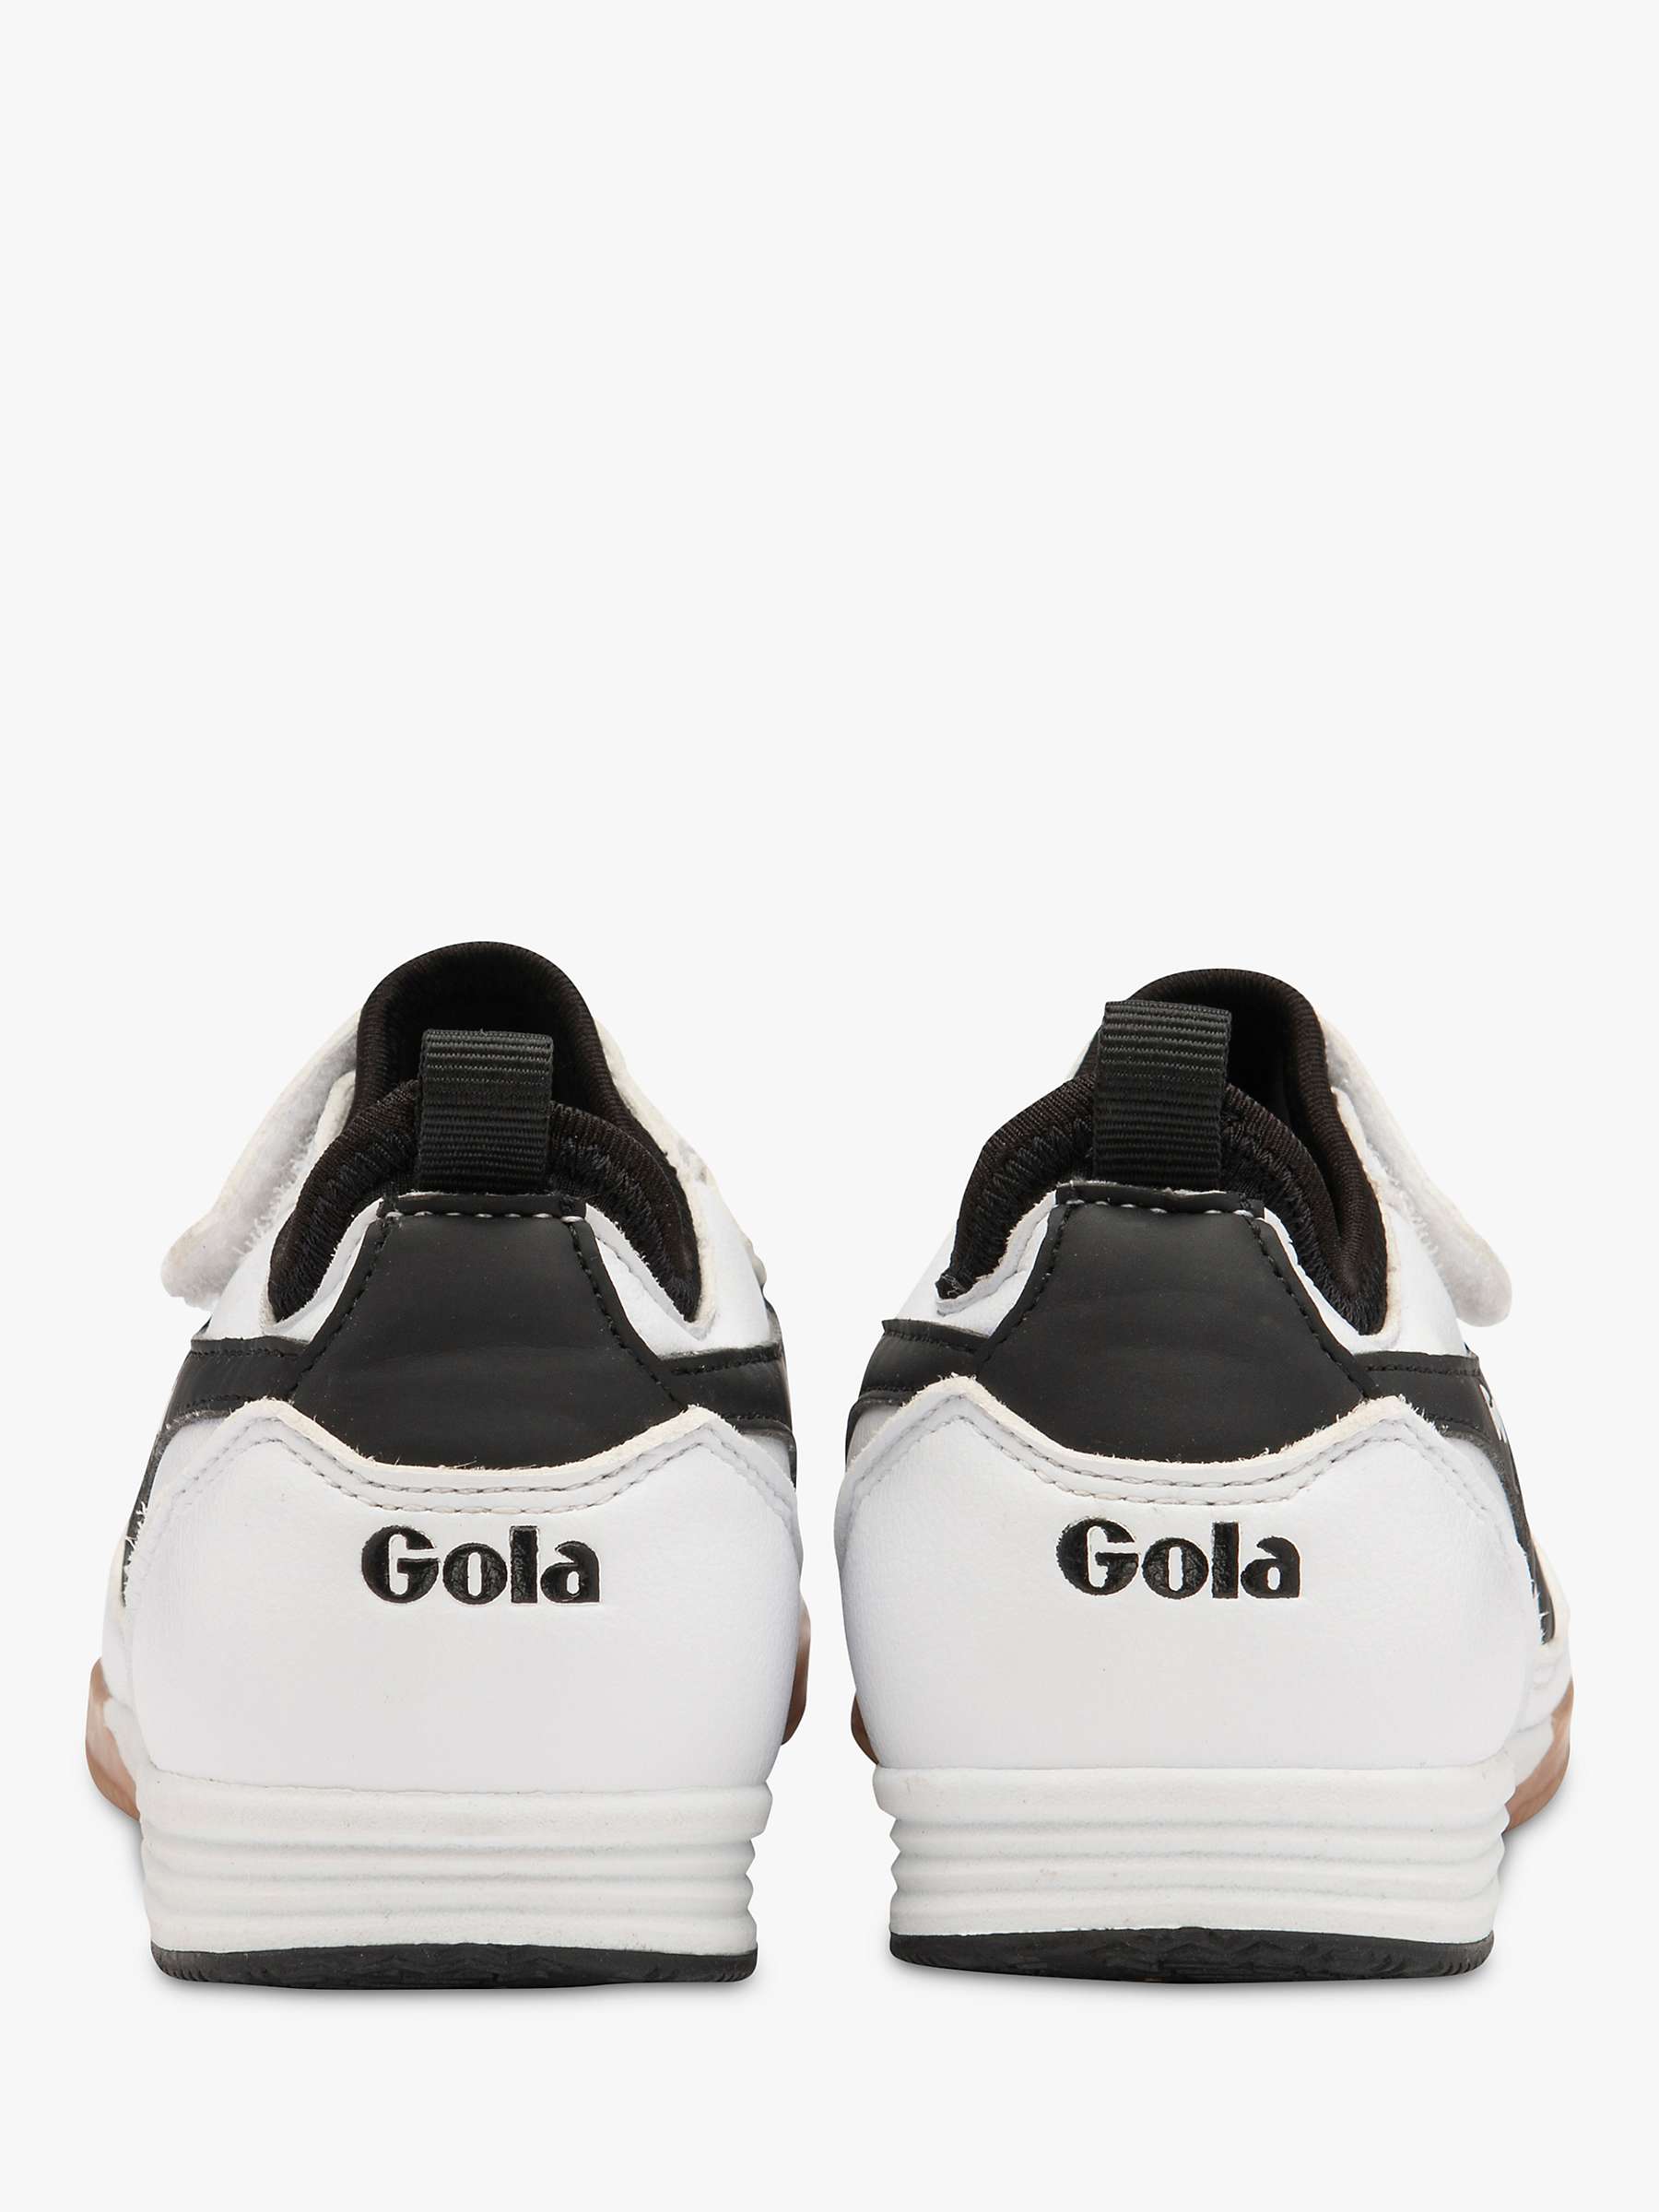 Buy Gola Kids' Junior Performance Ceptor TX QF Football Trainers Online at johnlewis.com